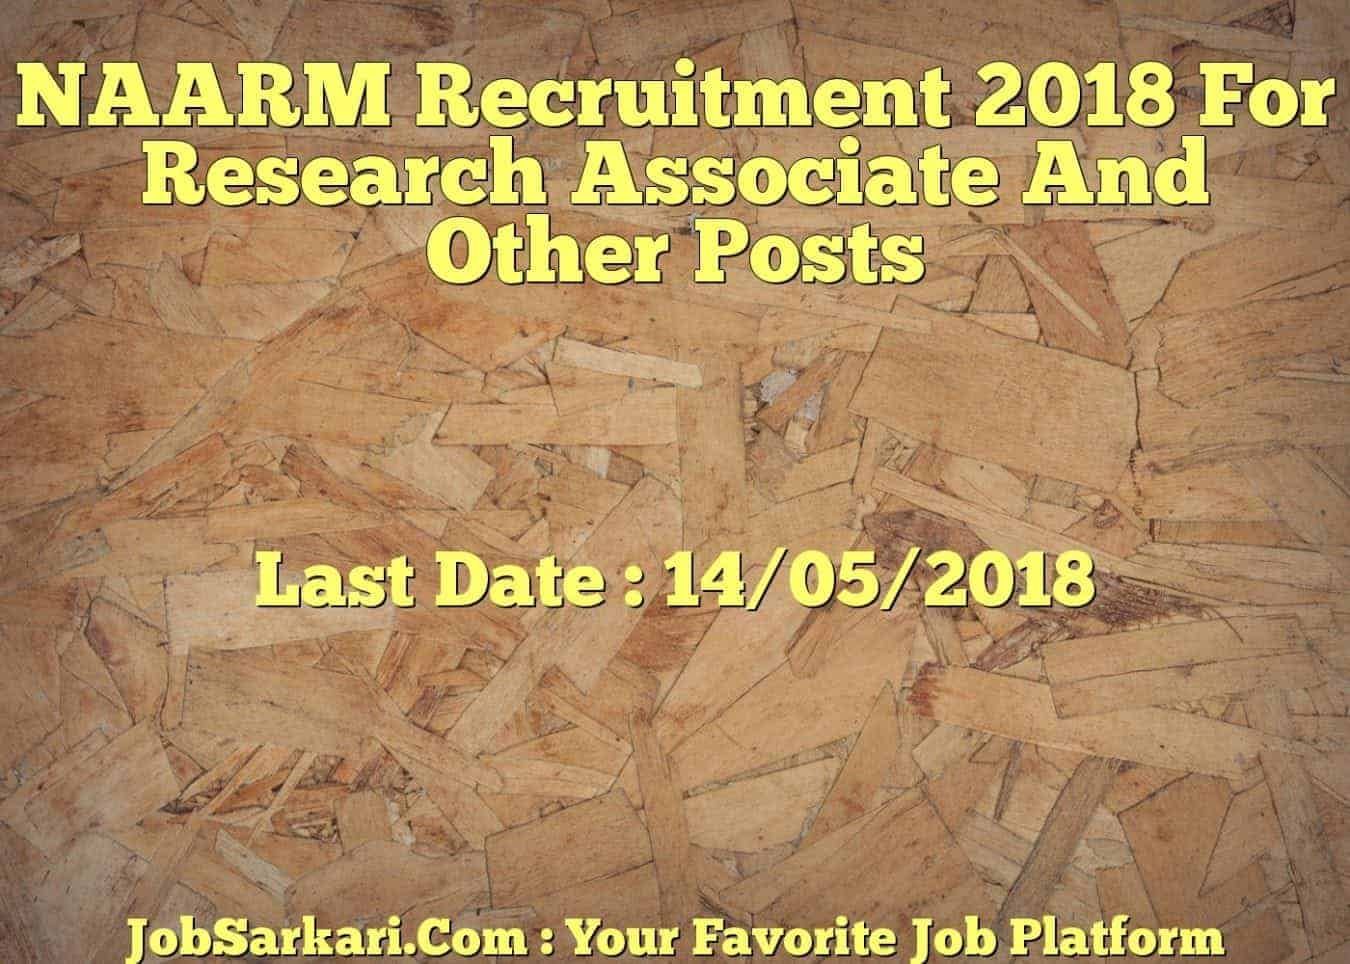 NAARM Recruitment 2018 For Research Associate And Other Posts